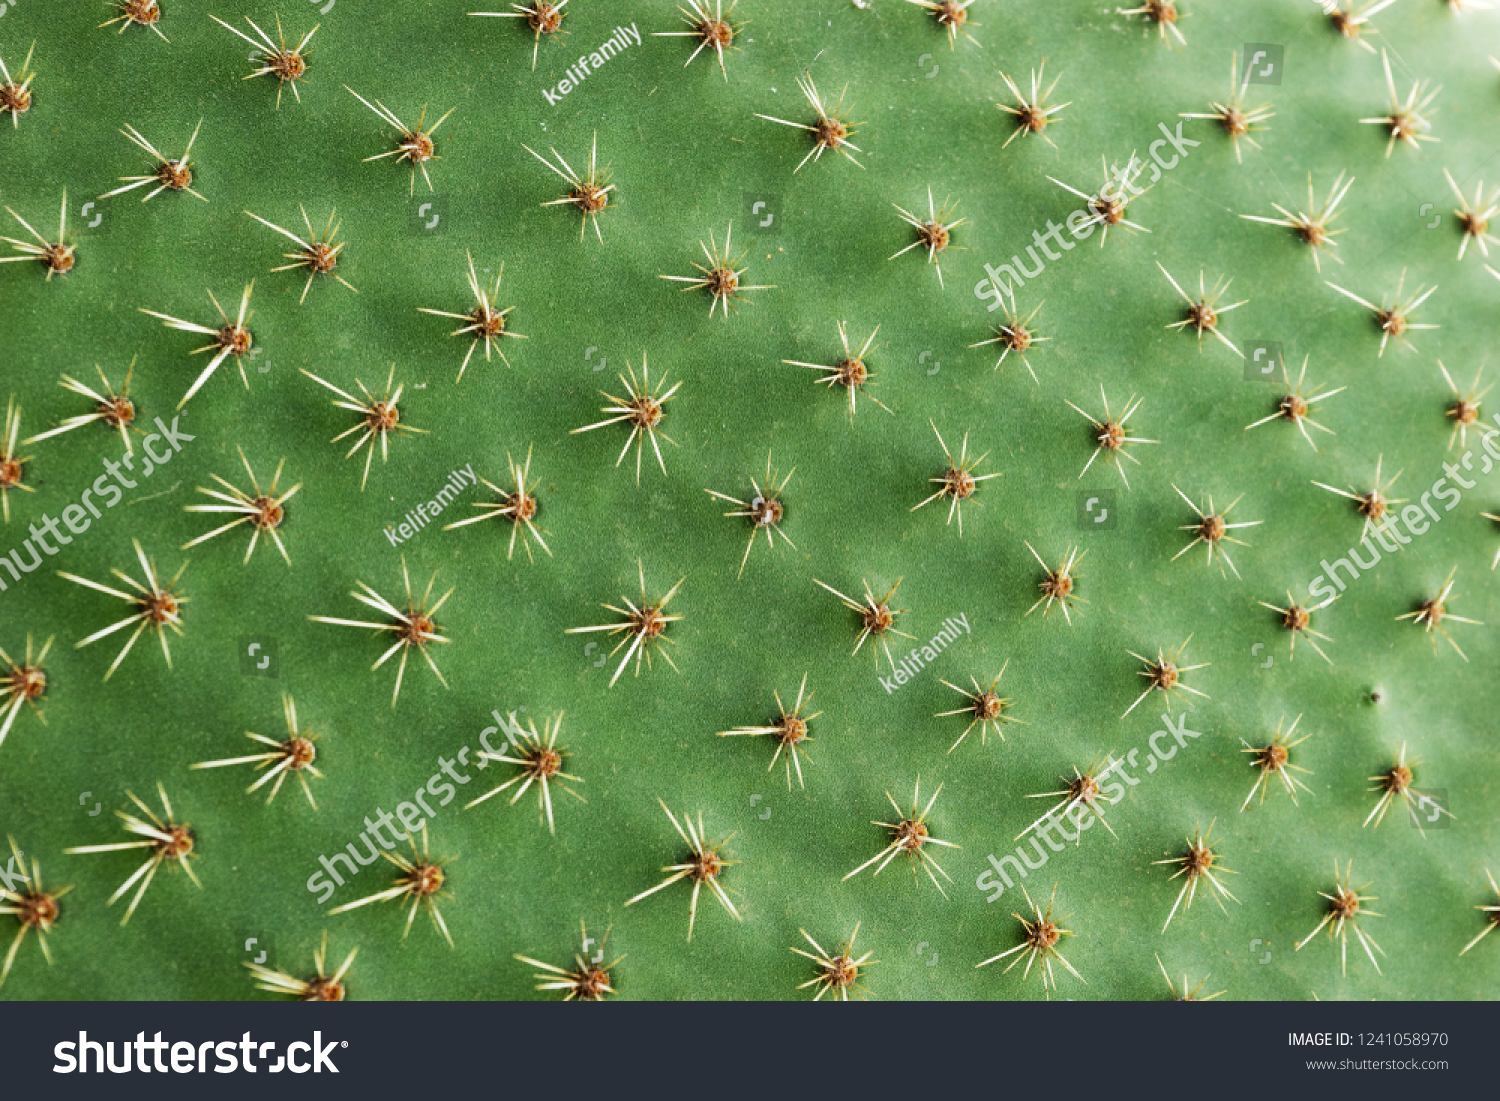 Closeup of spines on cactus, background cactus with spines #1241058970